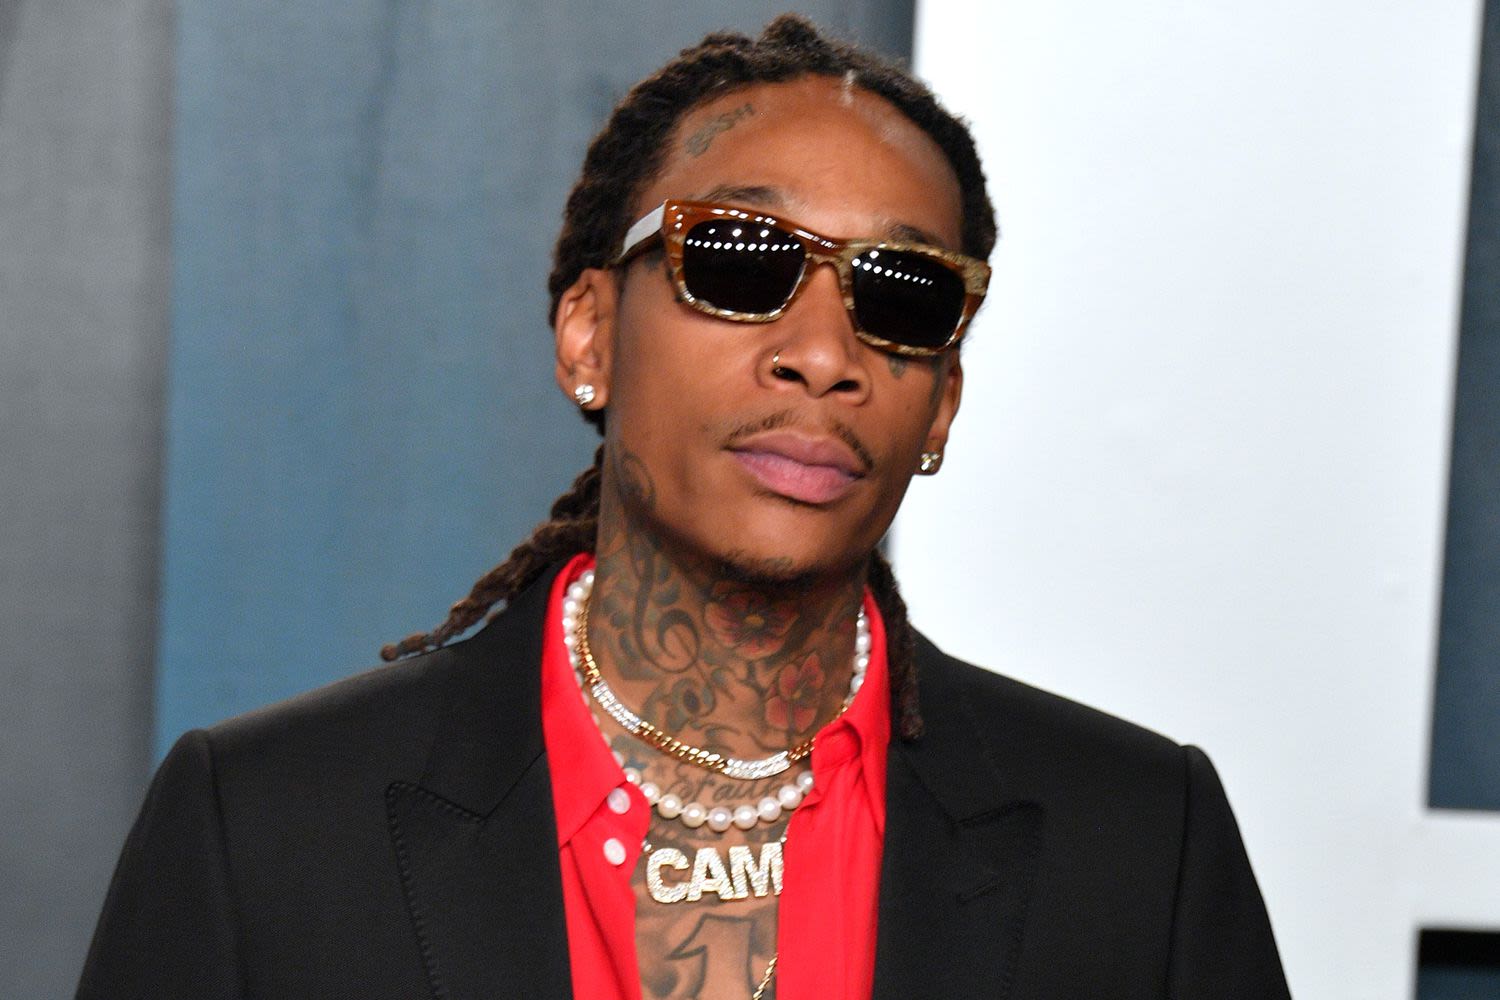 Wiz Khalifa apologizes for 'lighting up' onstage after Romania drug arrest: 'I didn't mean any disrespect'